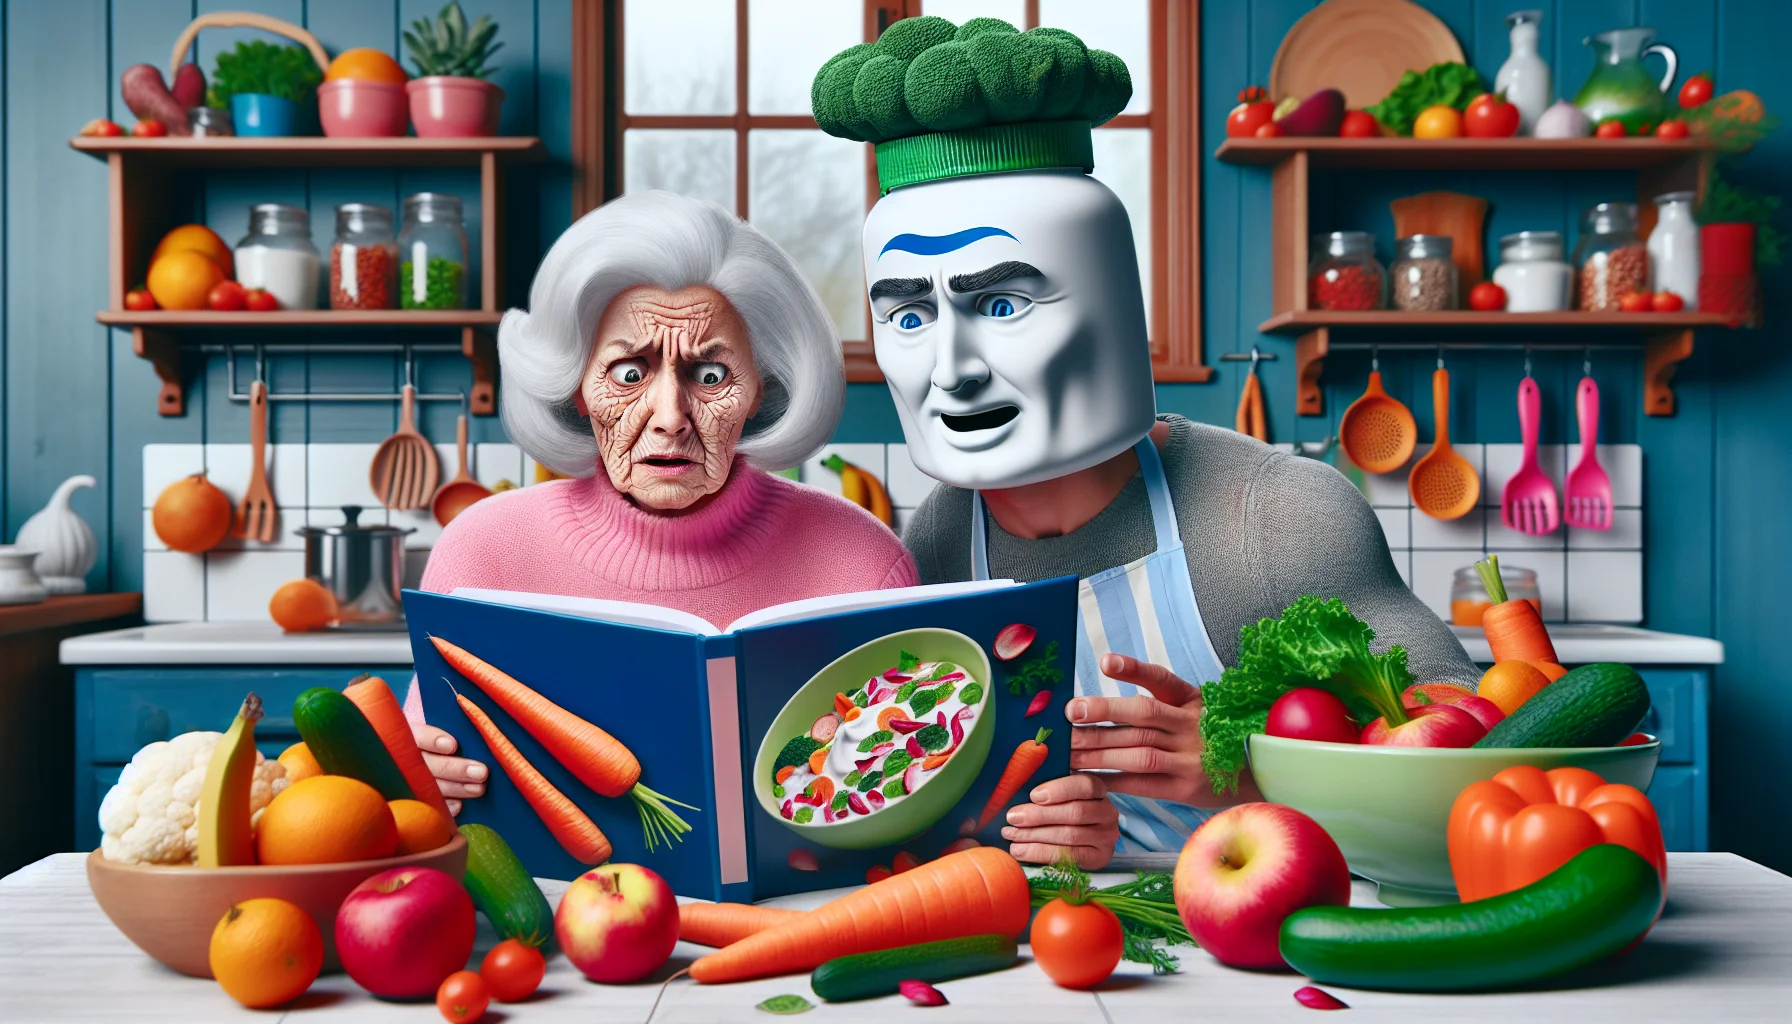 Imagine a humorous, lifelike image featuring a generic anti-aging skincare product. In this scene, an elderly Caucasian lady and her Middle-Eastern husband are trying to follow a healthy diet. They are sitting in their colorful kitchen, surrounded by an overflow of fruits and vegetables. Their faces show disbelief as they read a monstrous recipe book titled 'The Ultimate Health Guide'. Meanwhile, in the background, the skincare product is personified, wearing a green salad bowl as a hat, holding a carrot like a wand, mirroring a health advocate, adding a pinch of comedy to the situation.